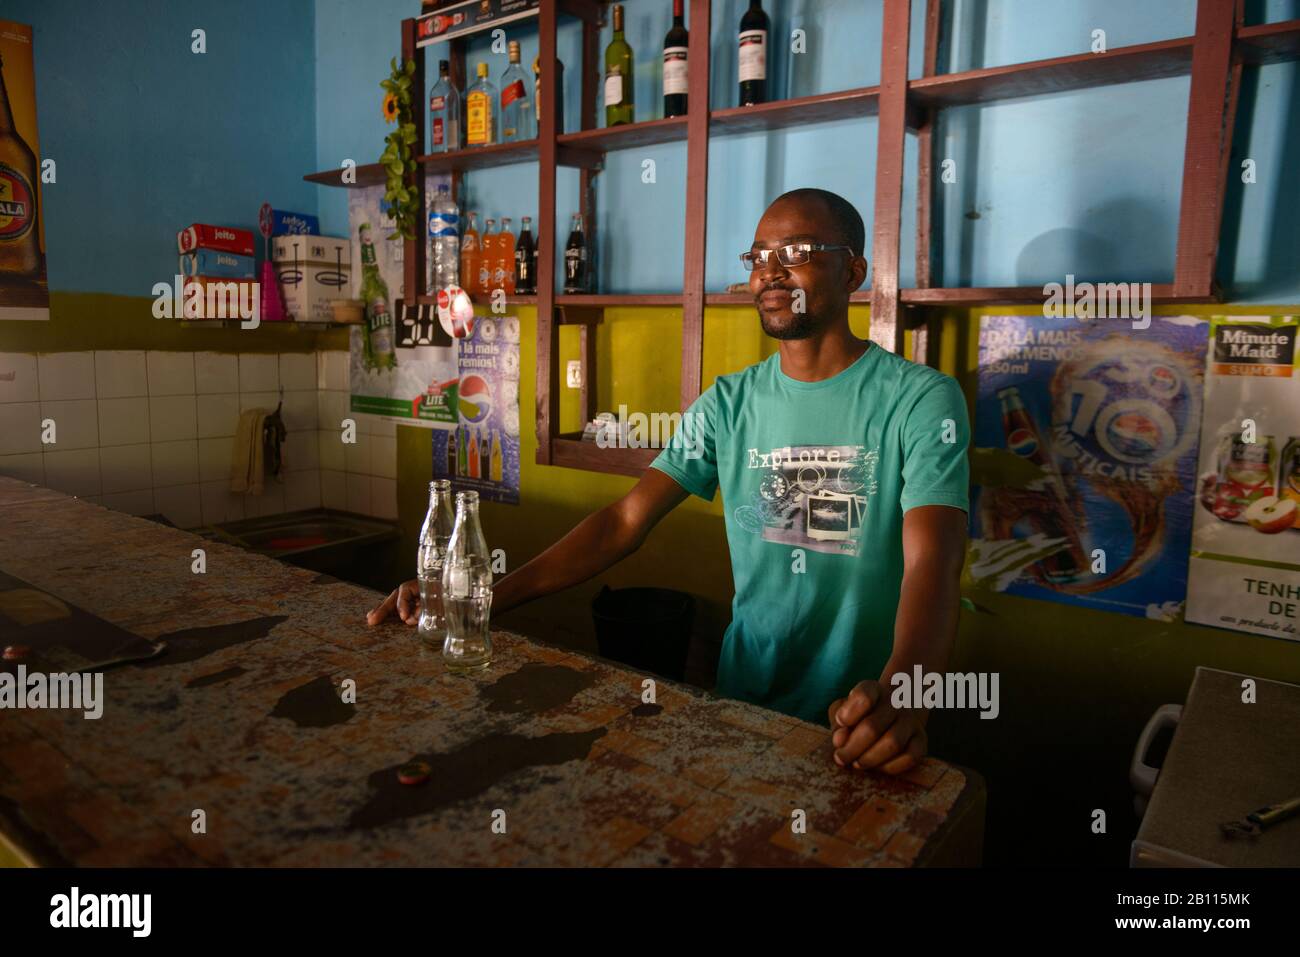 Bartender at the bar of a bar, Mozambique, Africa Stock Photo